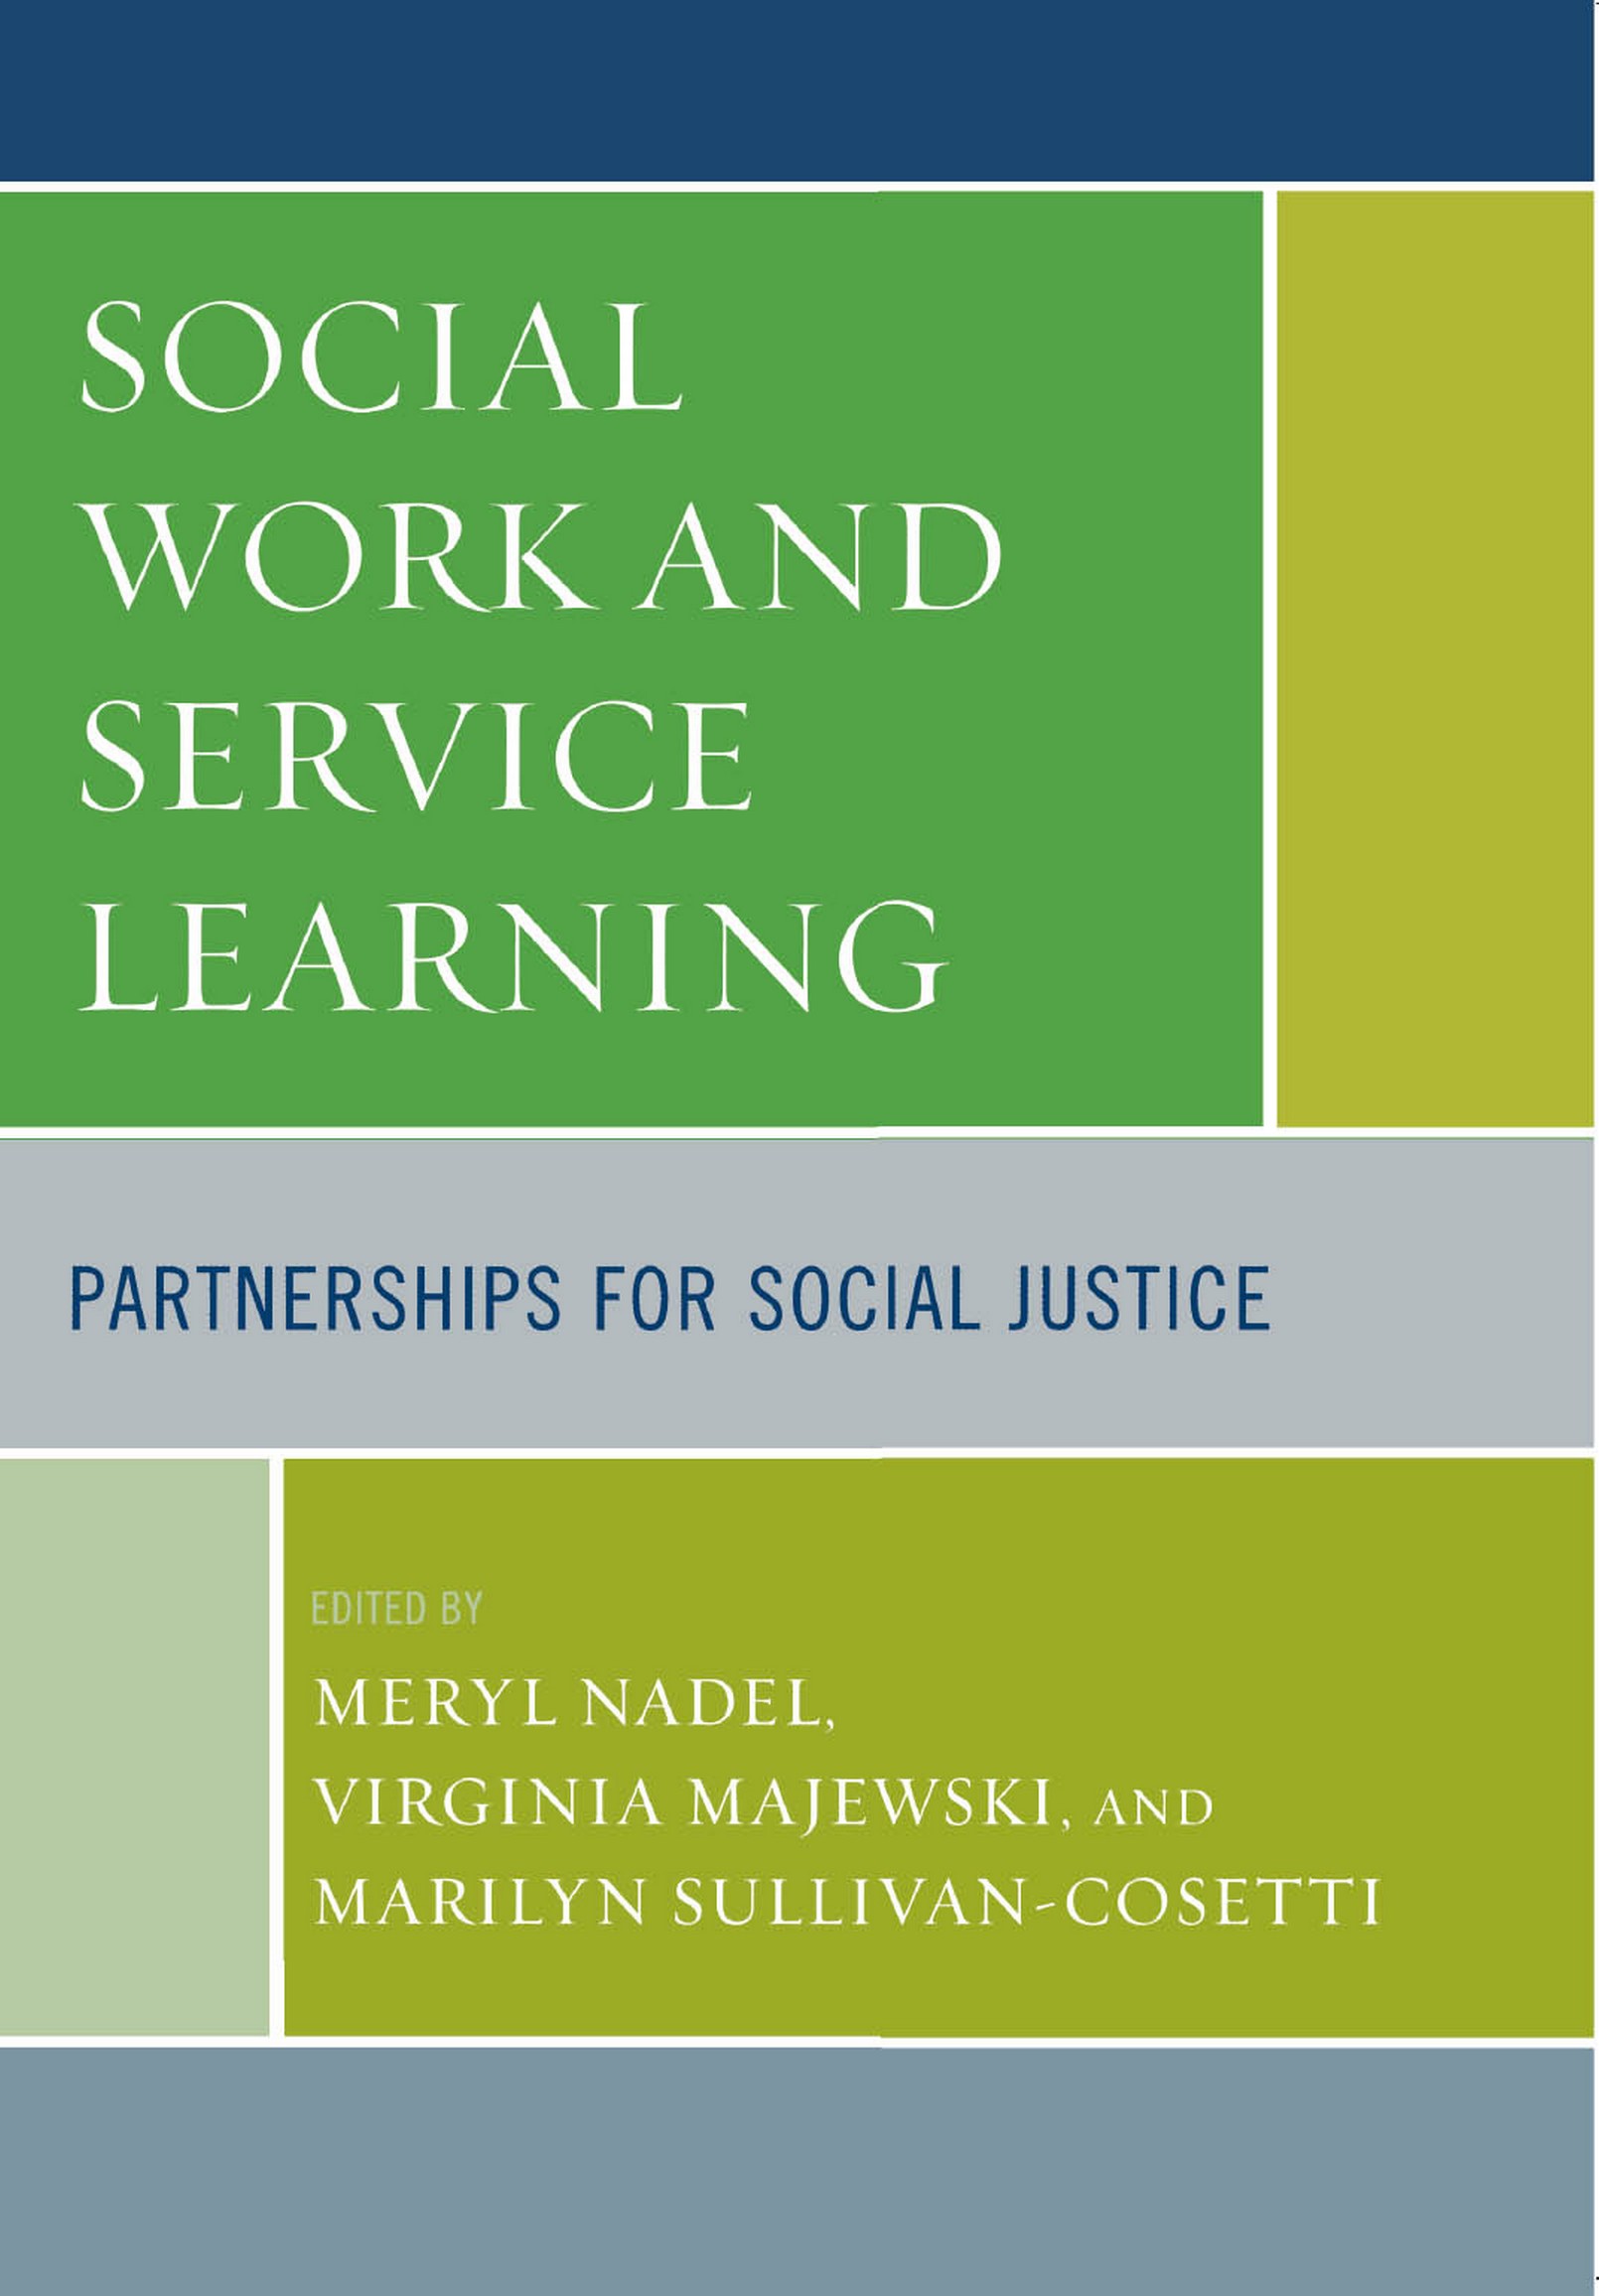 Social Work and Service Learning: Partnerships for Social Justice